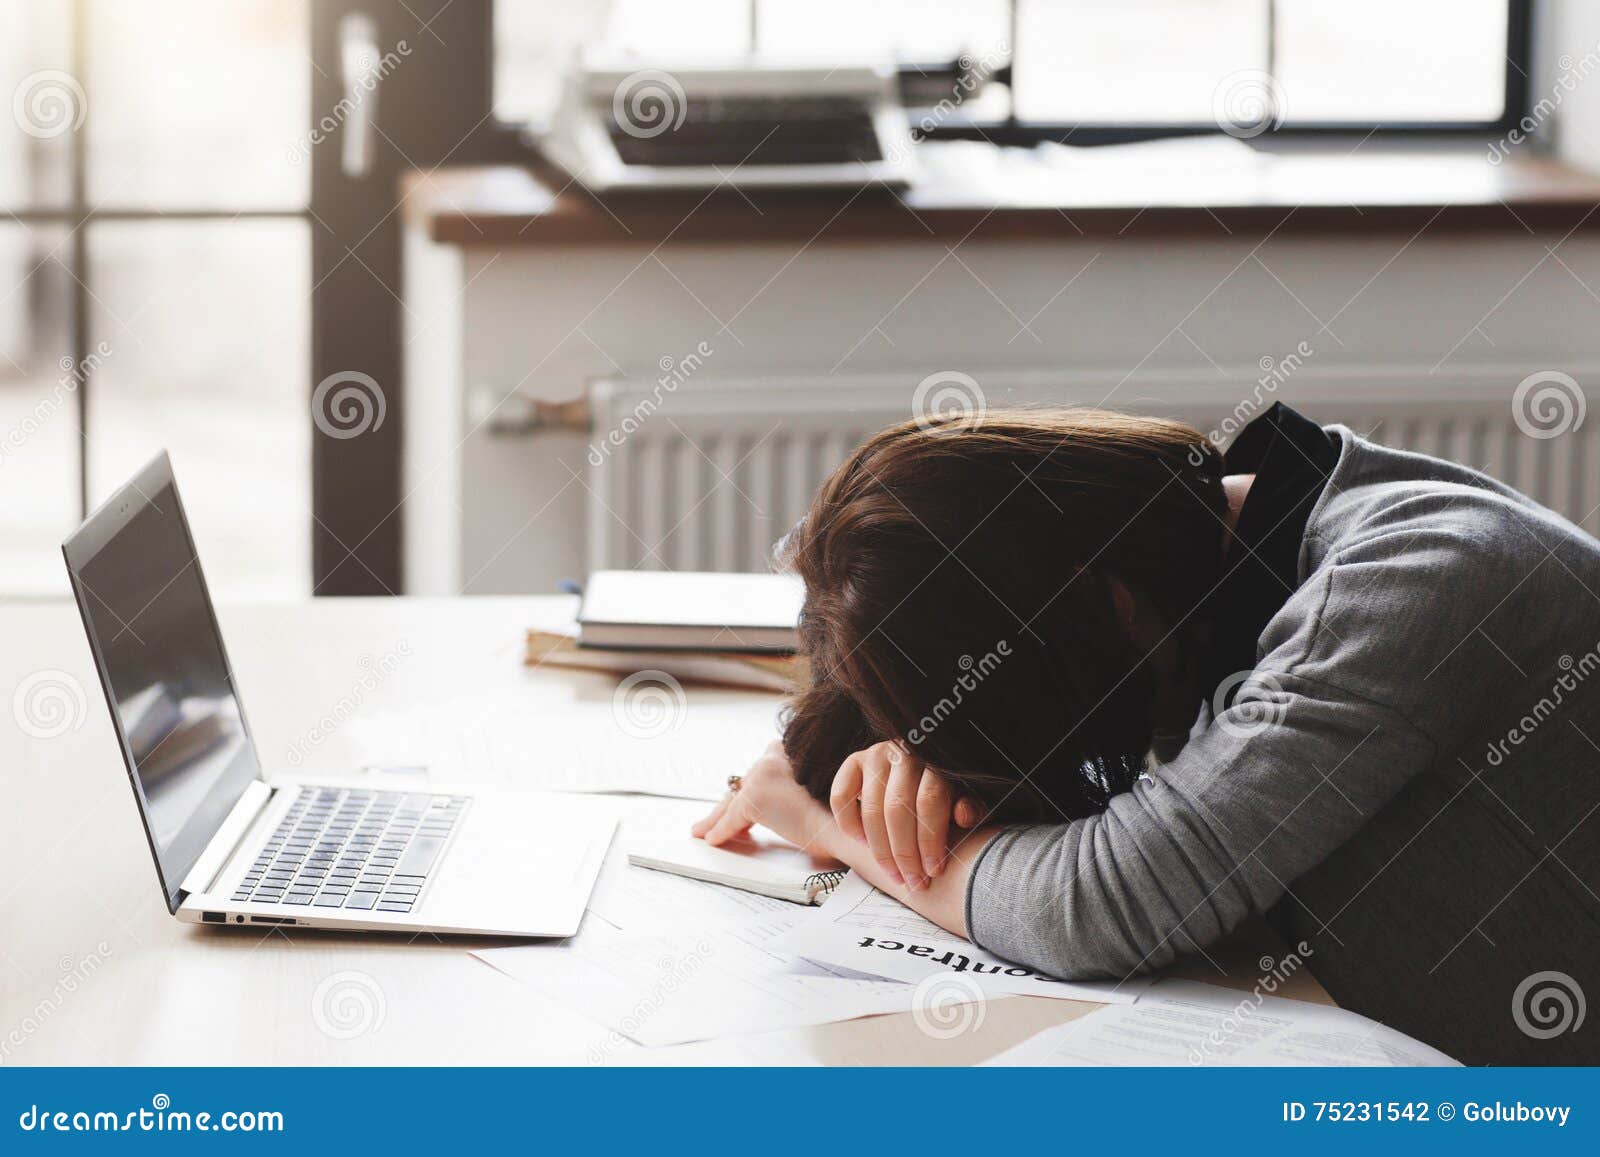 Young Tired Woman Sleeping At Office Desk Stock Photo Image Of